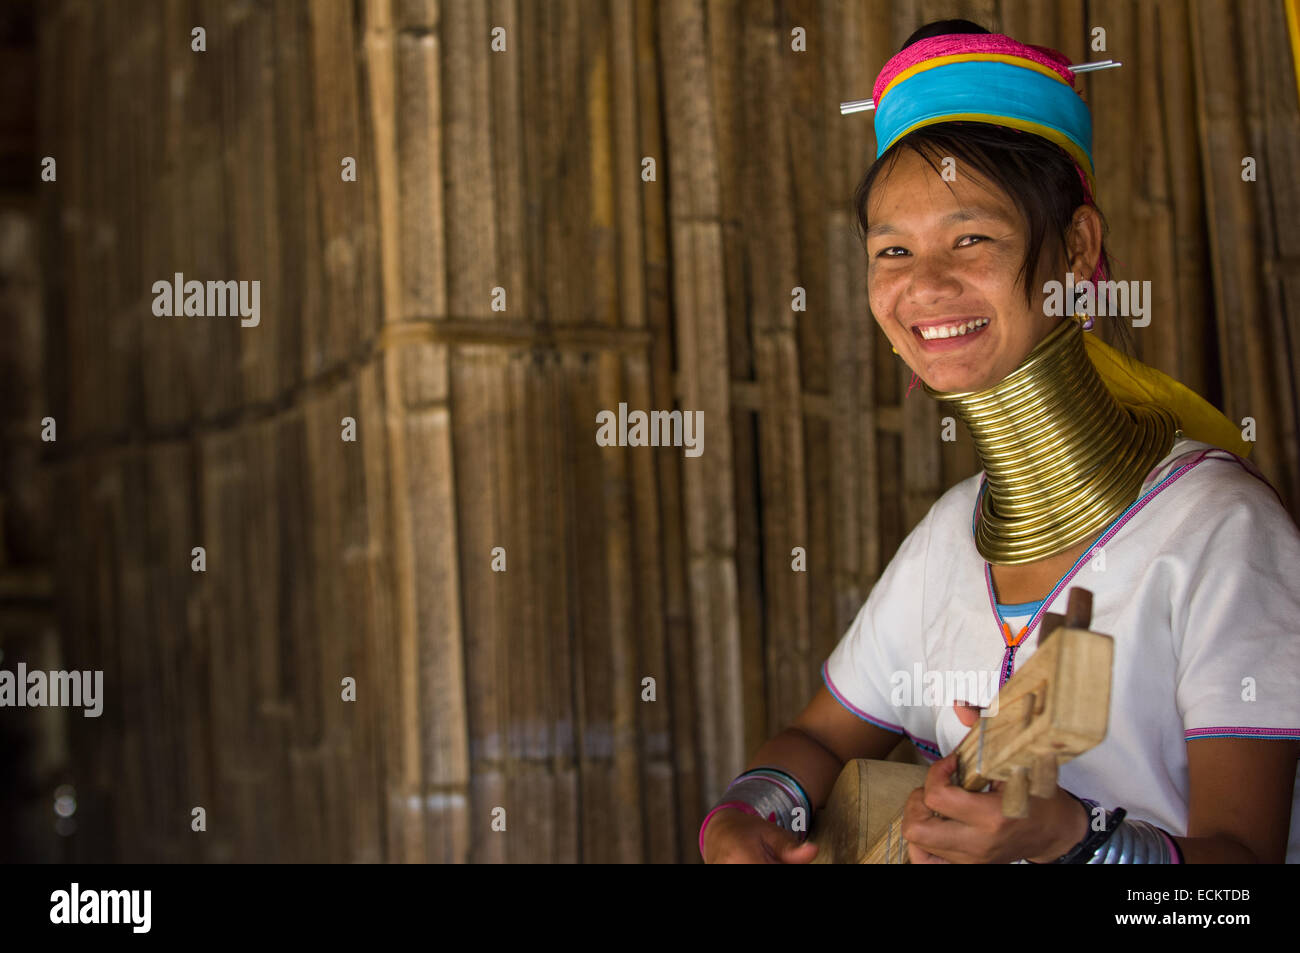 Wonam from the Kayan Lahwi tribe (Long-Necked Kayan) wearing brass neck rings, in a bamboo hut at a tourist village near Chiang Mai, Thailand Stock Photo